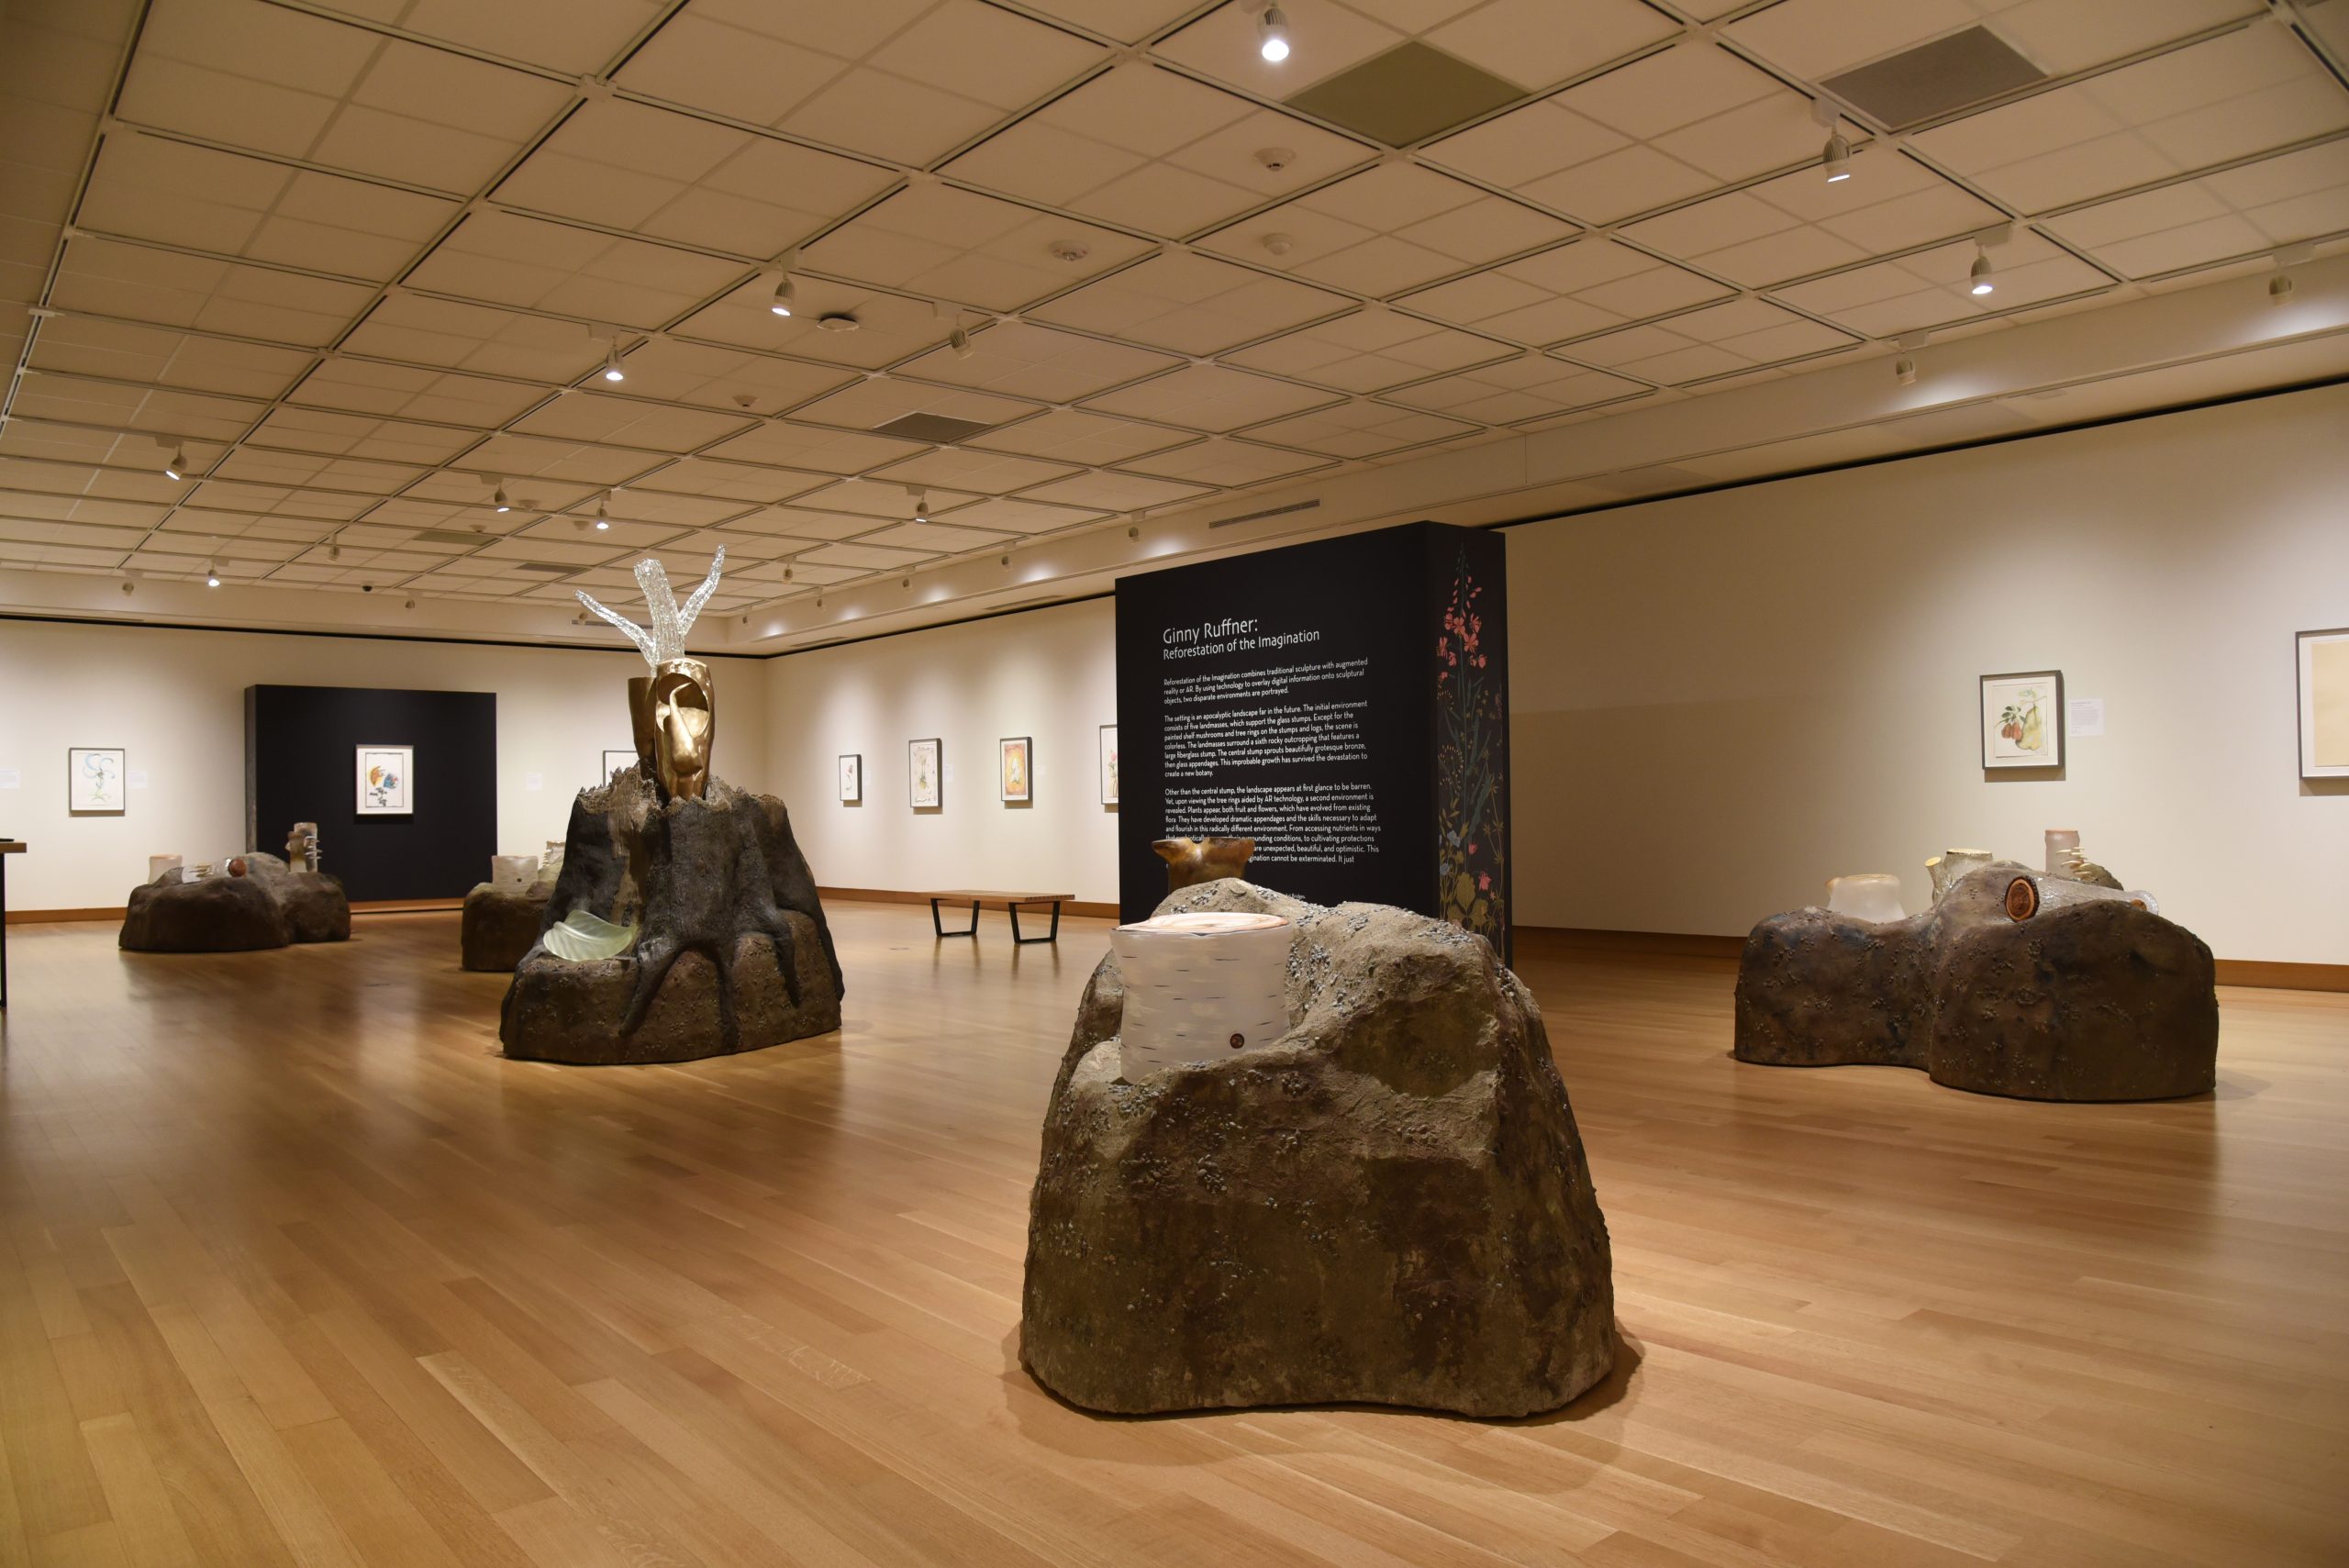 Sculptures of landmasses are dispersed throughout the gallery. Glass stumps with tree rings sit atop each landmass. The surrounding walls are filled with framed drawings of invented plant species.